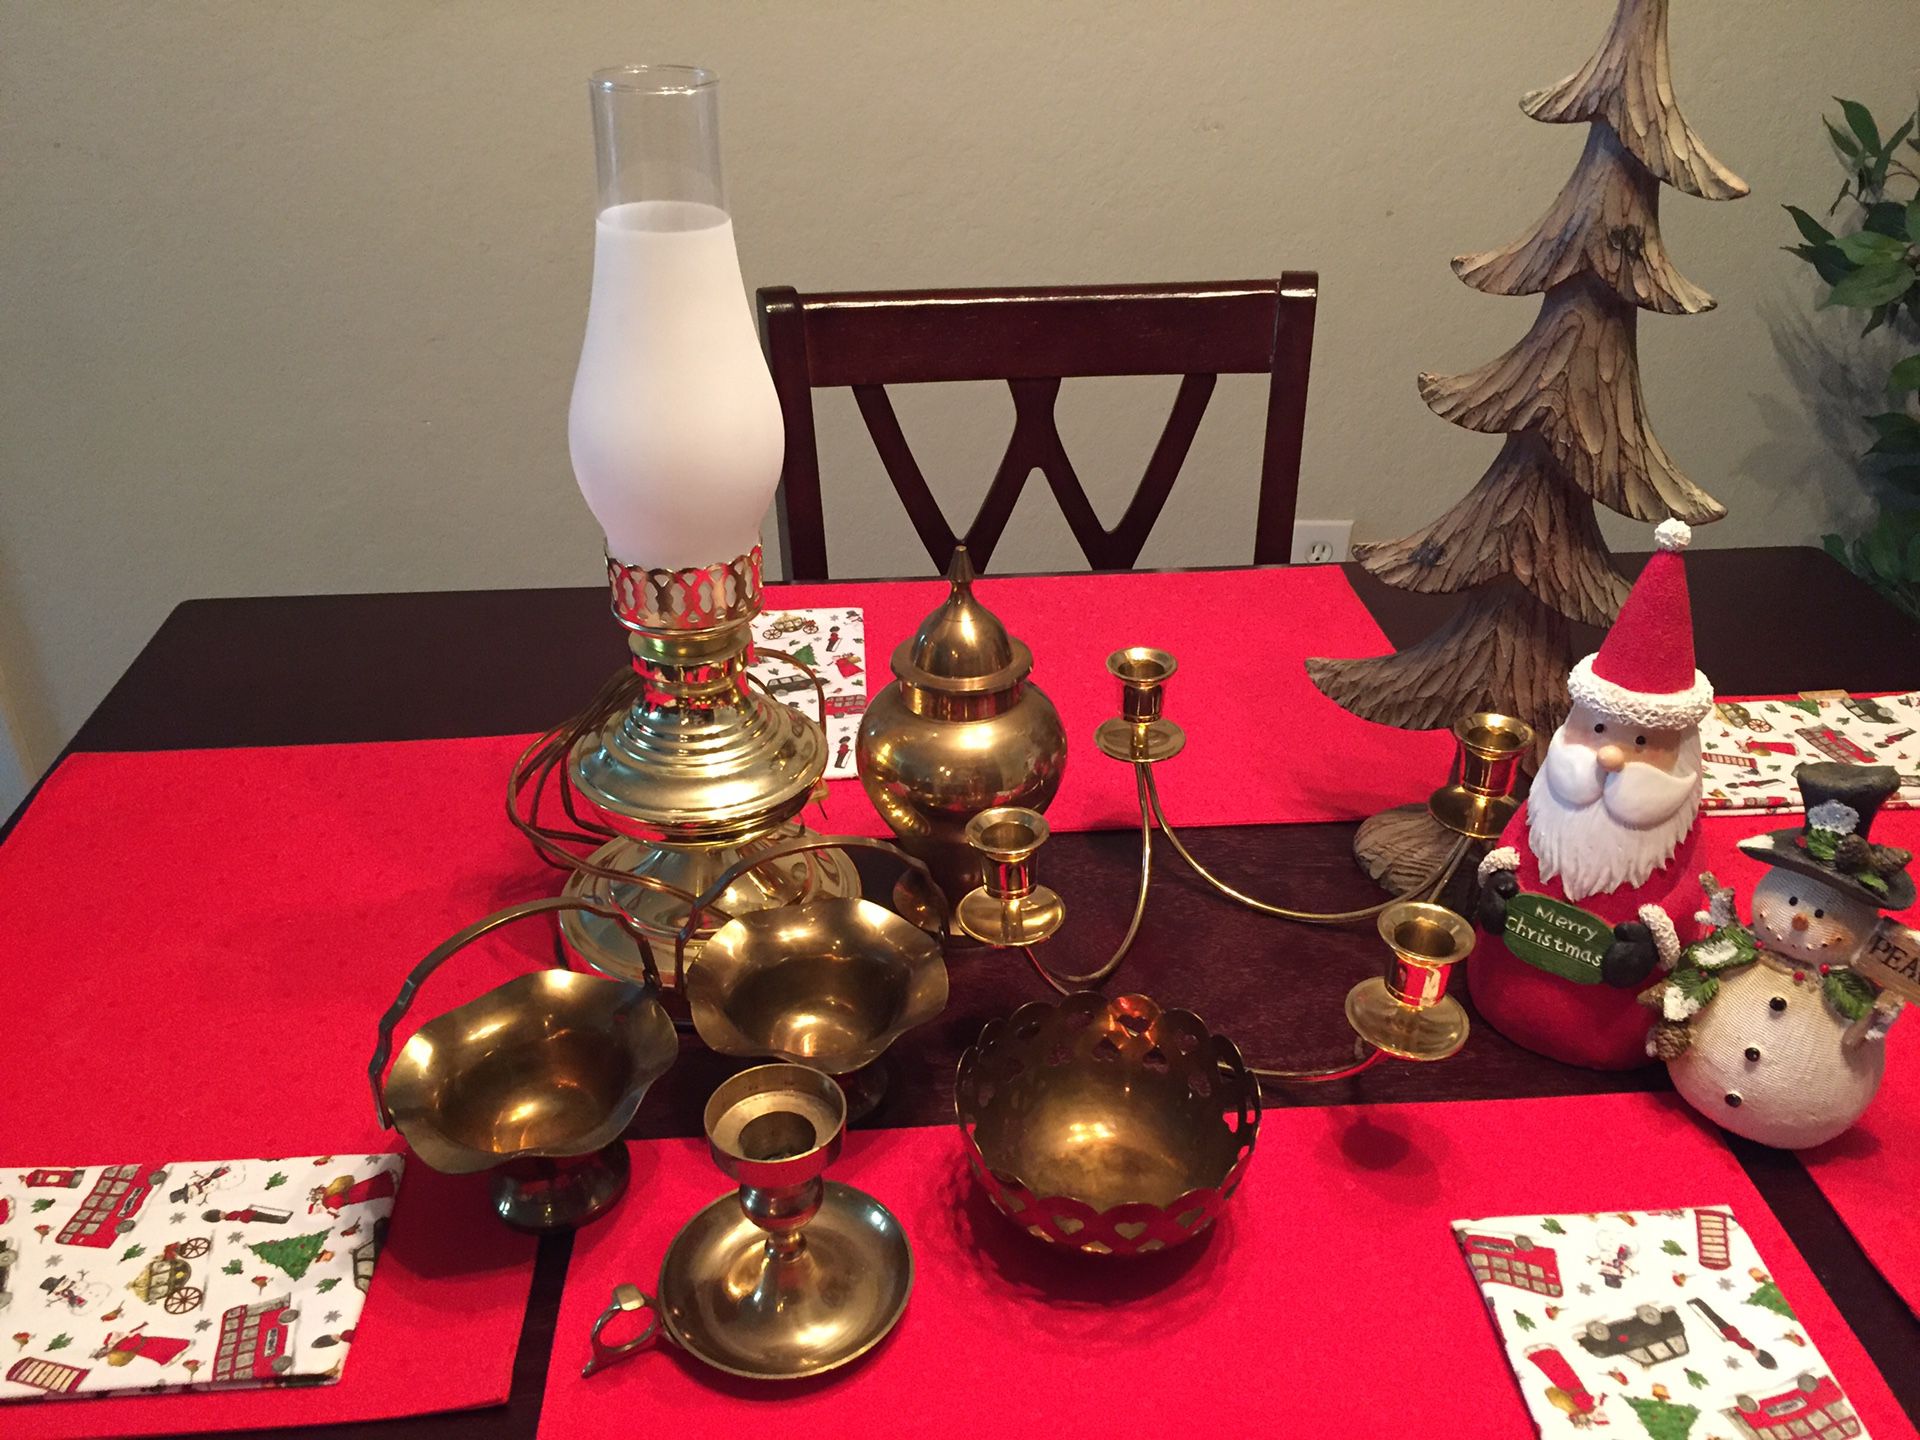 Awesome brass lot including lamp, urn, baskets, candle holders